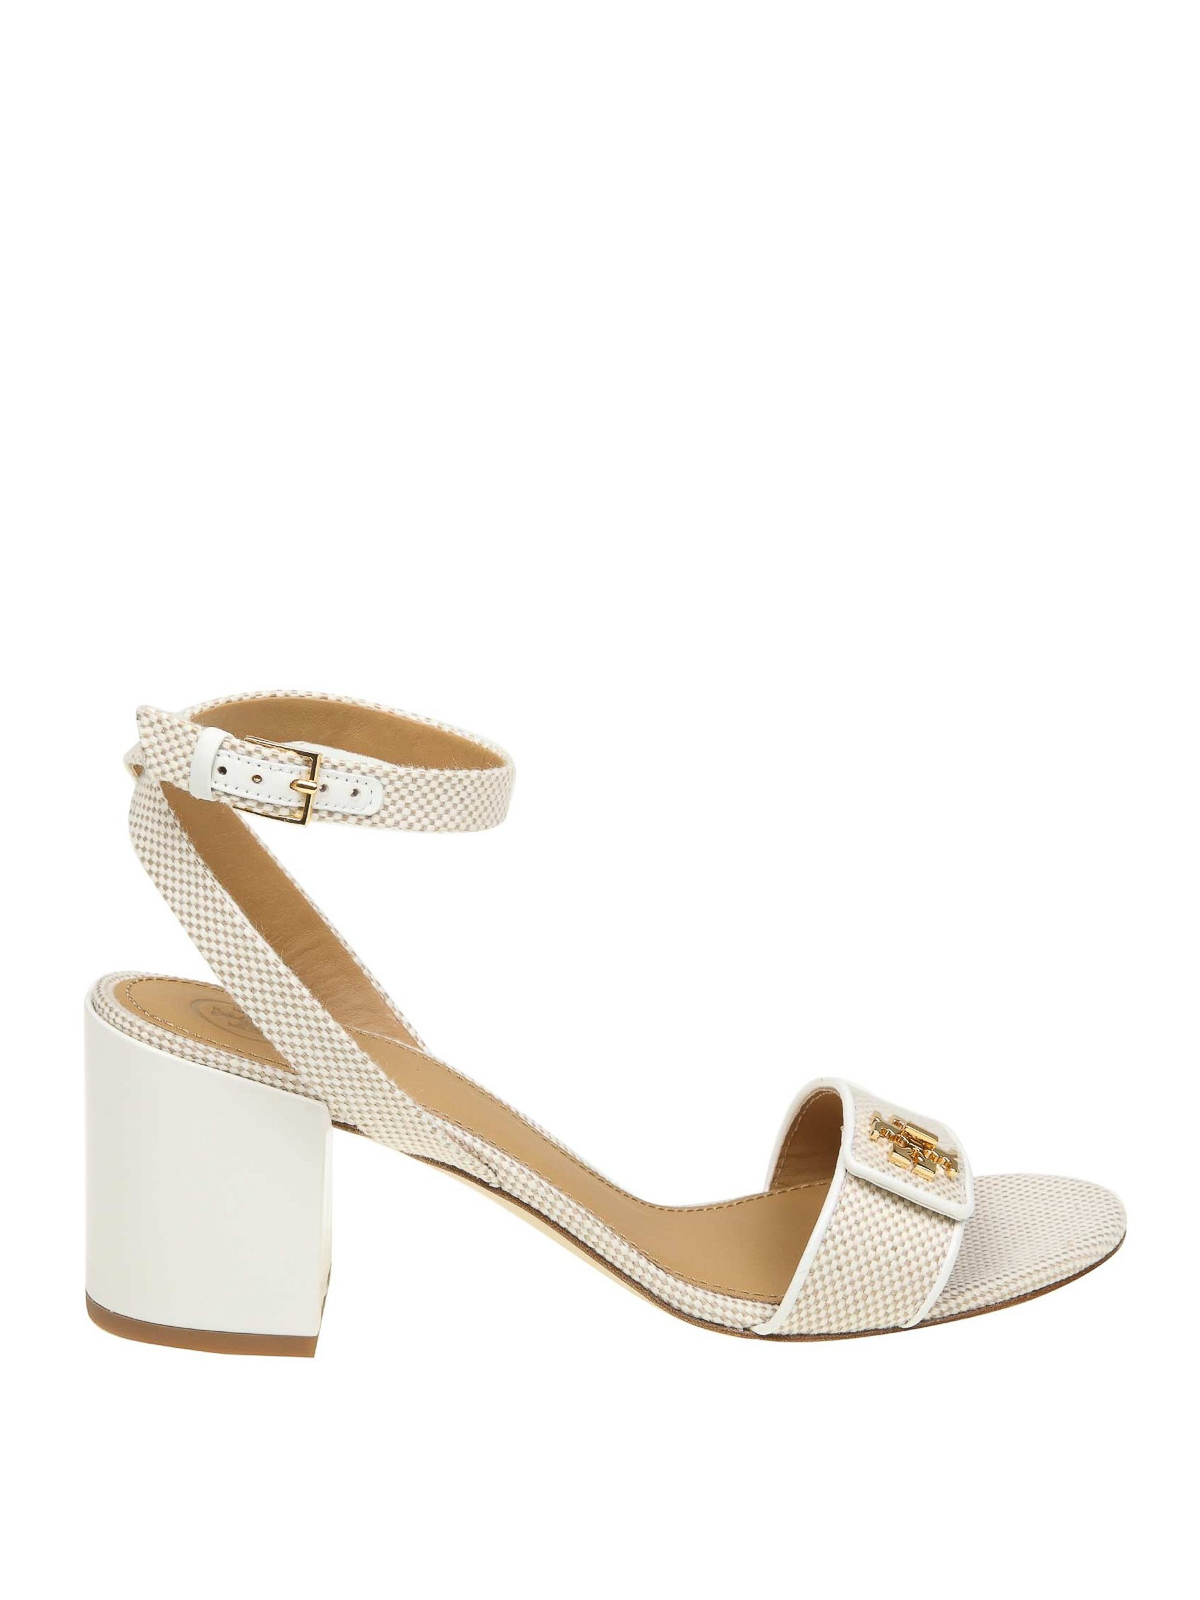 Sandals Tory Burch - Kira canvas and leather sandals - 55518263